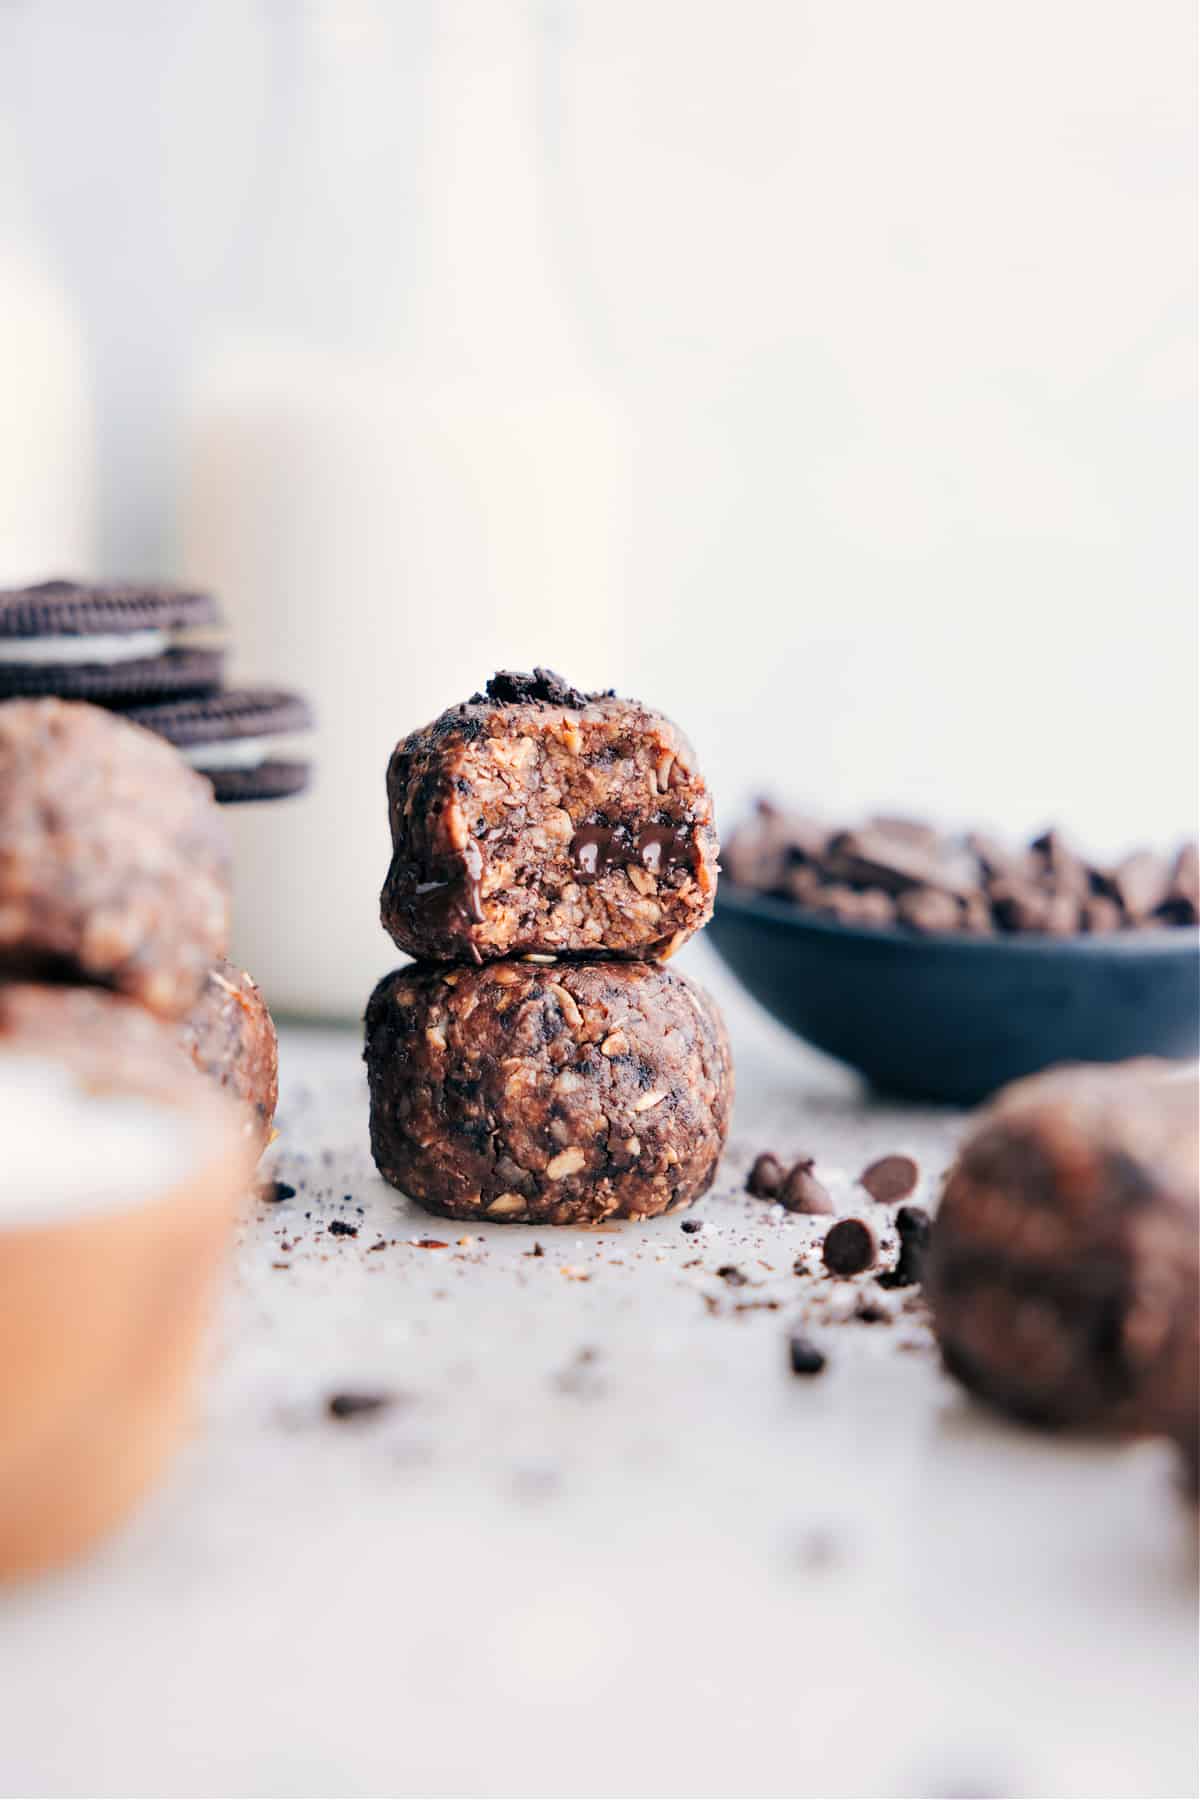 The high-protein cookies and cream oreo bites stacked on top of each other ready to be your new favorite snack.